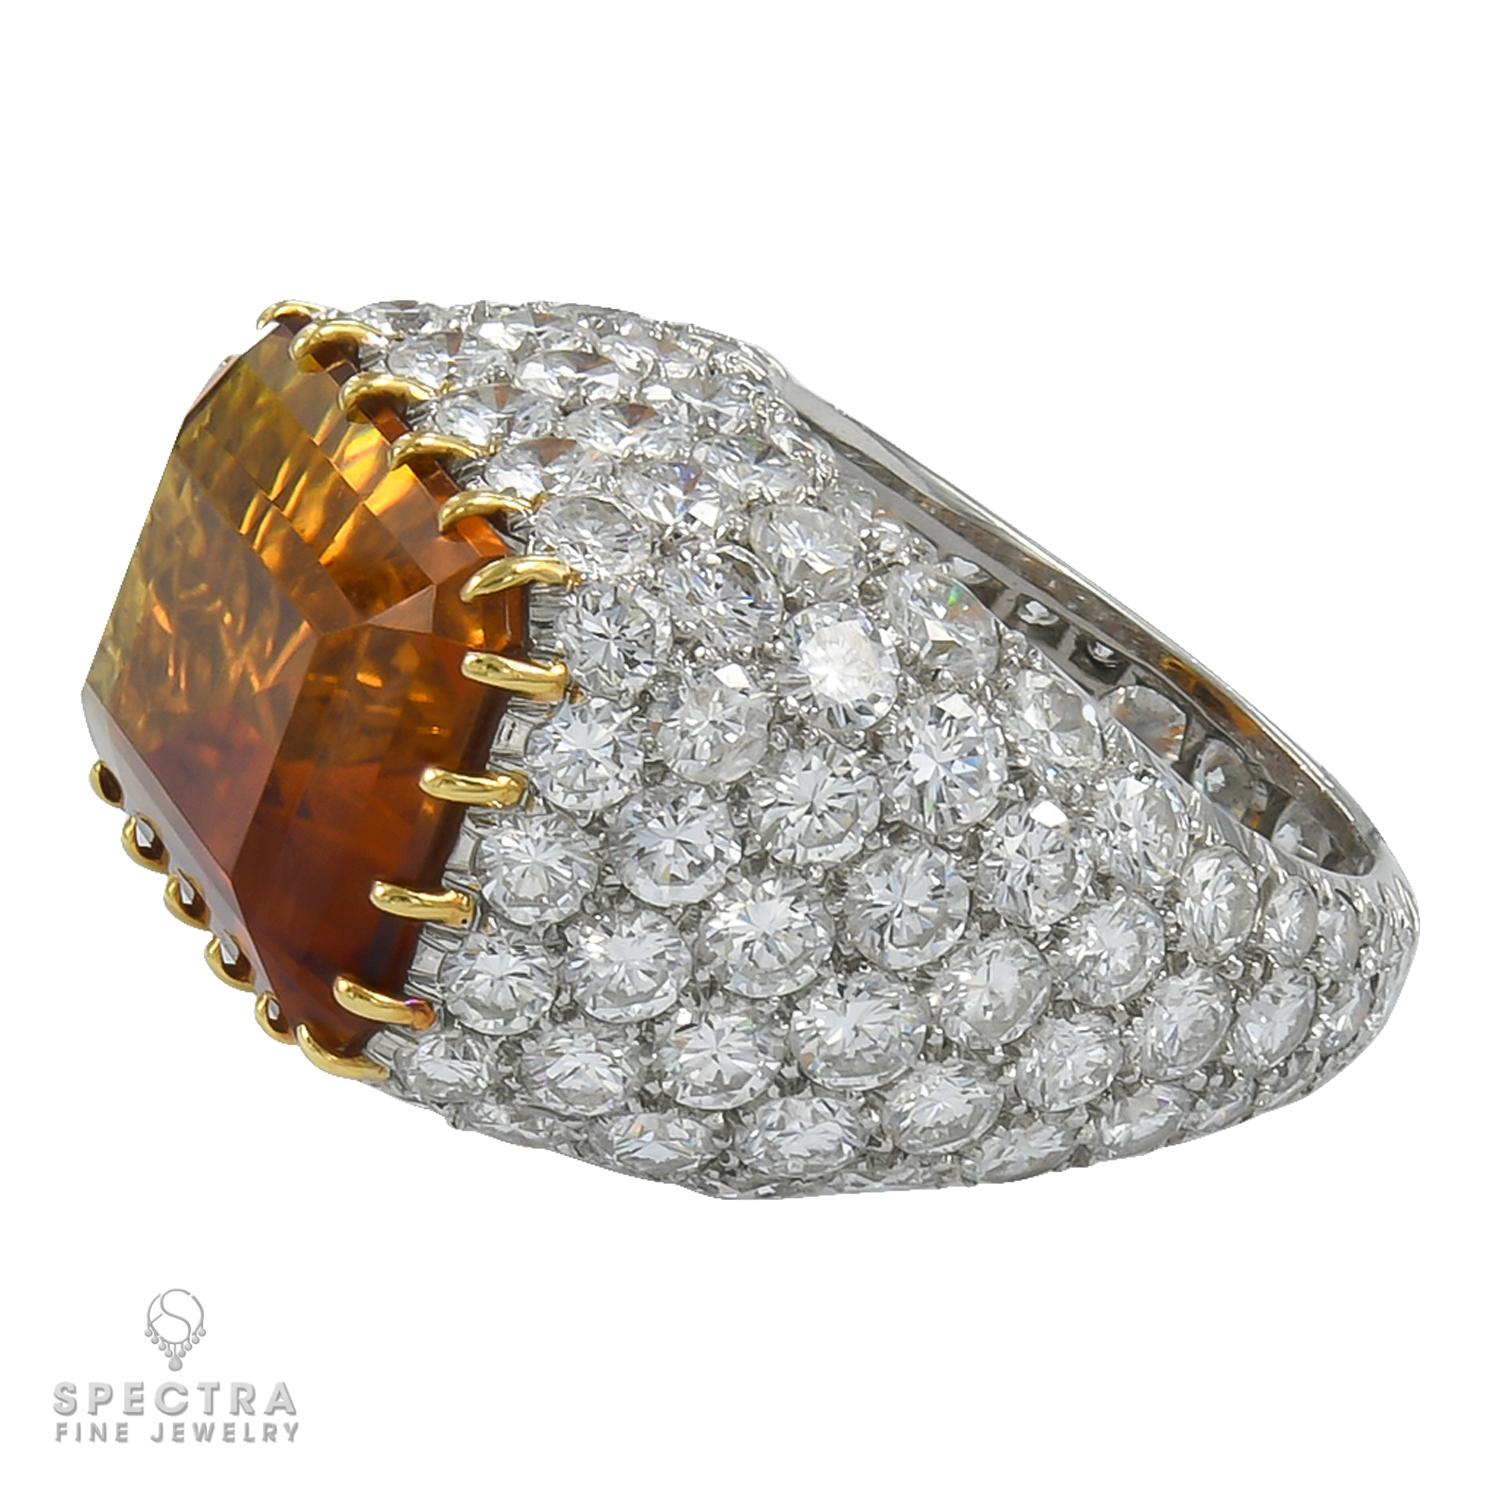 A beautiful cocktail ring showcasing an emerald-cut citrine stone in the center, accented by round pave diamonds. Made by Tiffany & Co. circa 1980s.
Citrine measures 14.43mm x 11.56mm.
Pave Round Diamonds
Metal is platinum, gross weight 10.10gr
Size